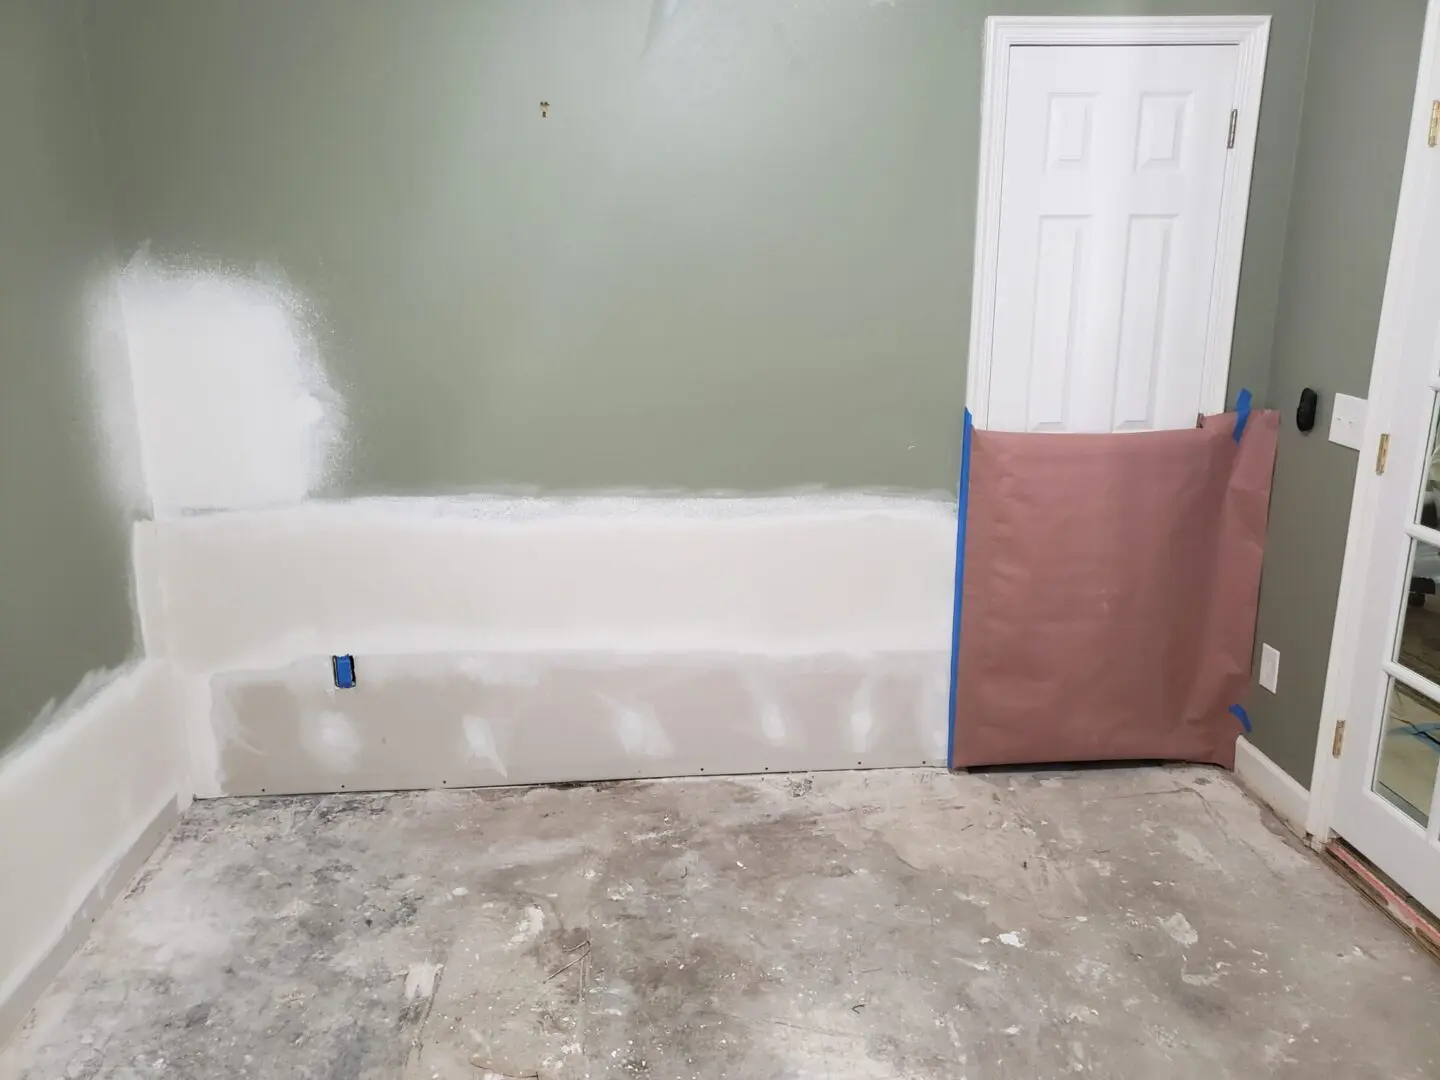 A room with the door open and paint on the floor.